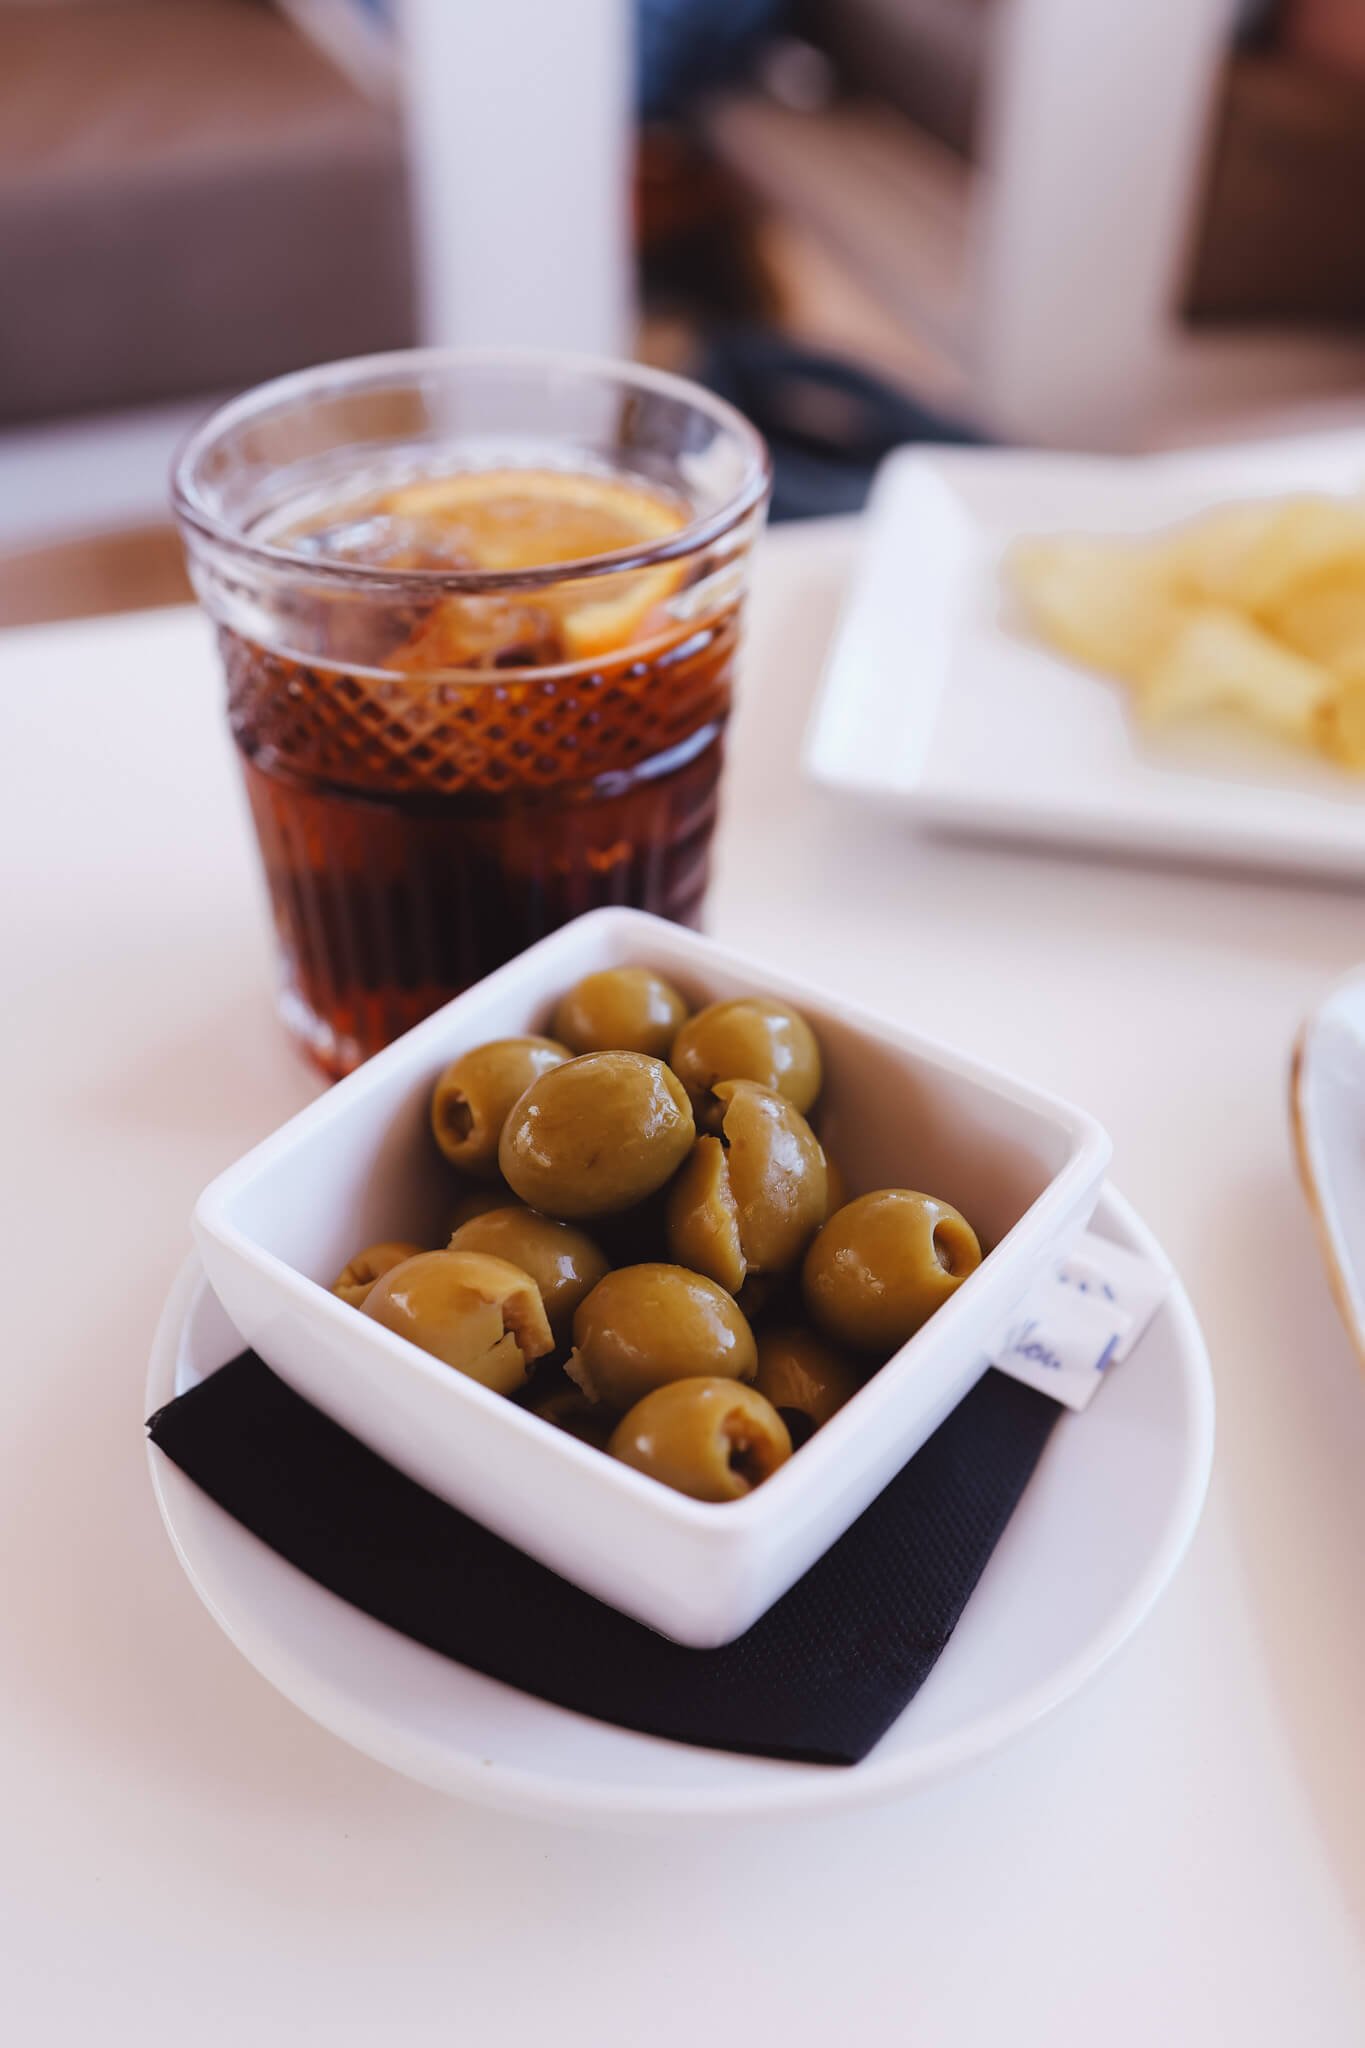 costa-daurada-travel-itinerary-best-things-to-see-for-couples-vermut-olives.jpg